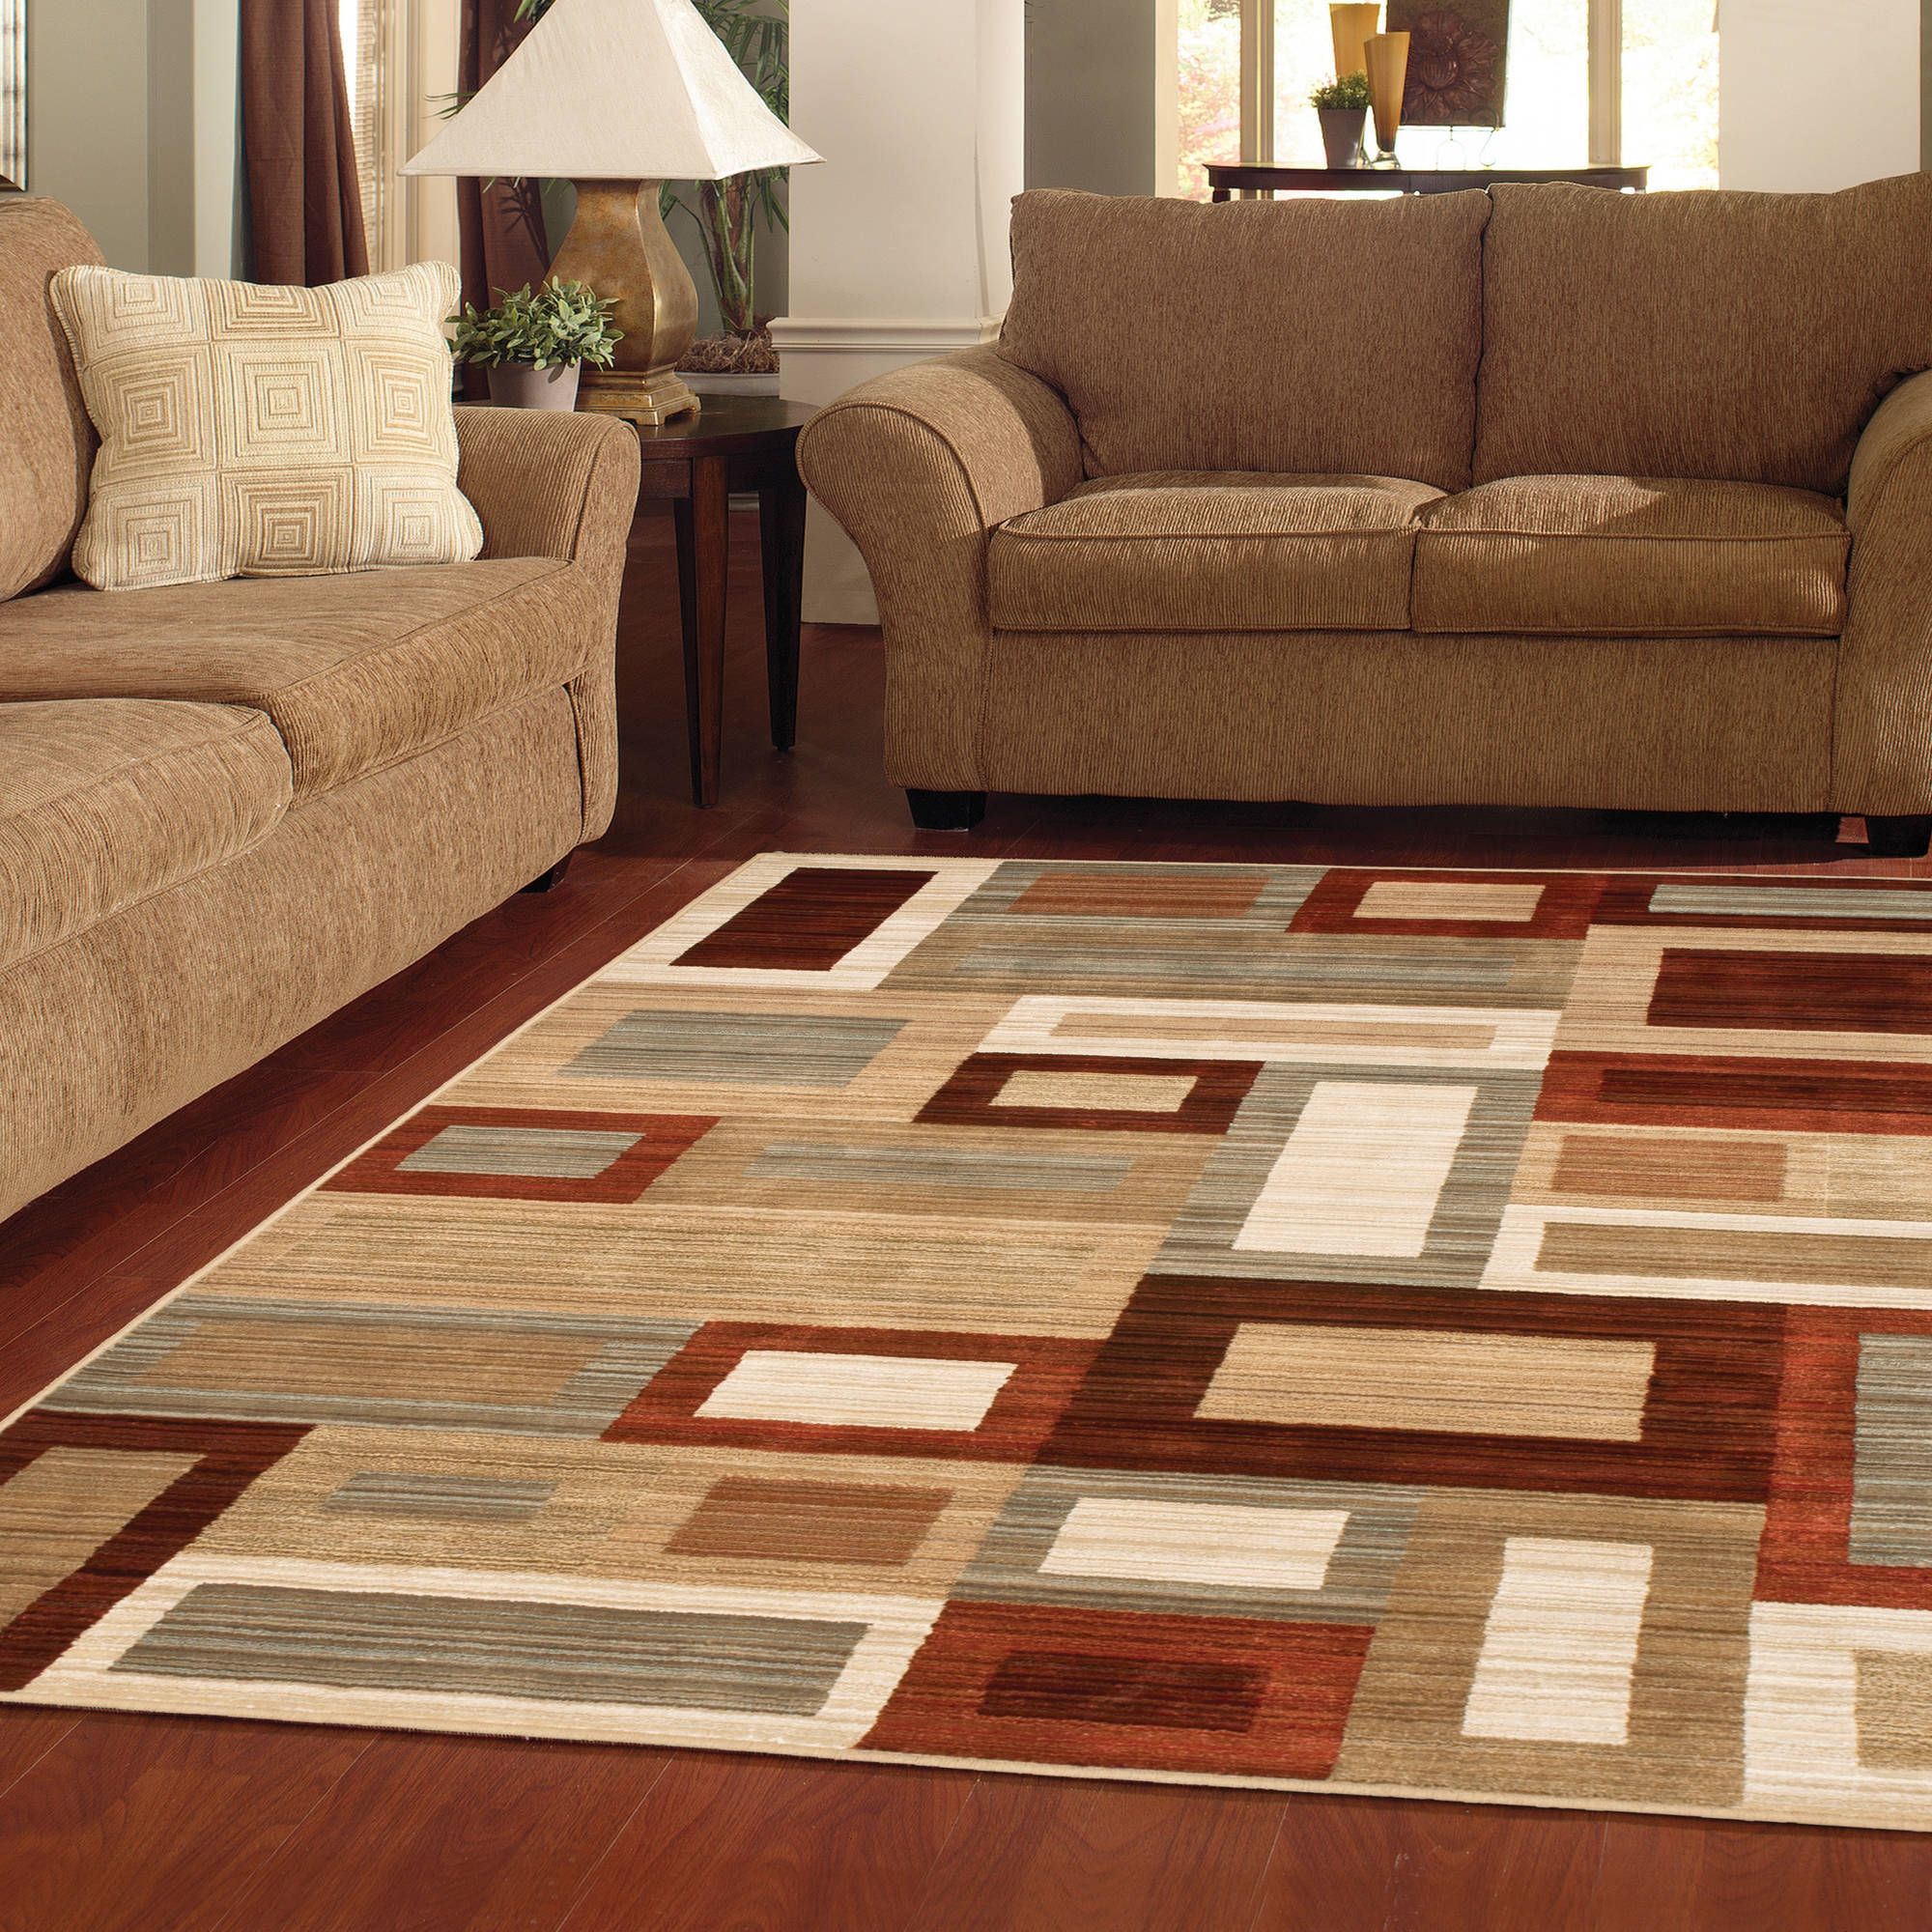 Better Homes And Gardens Franklin Squares Area Rug Or Runner Pertaining To Hallway Runners At Walmart (View 10 of 20)